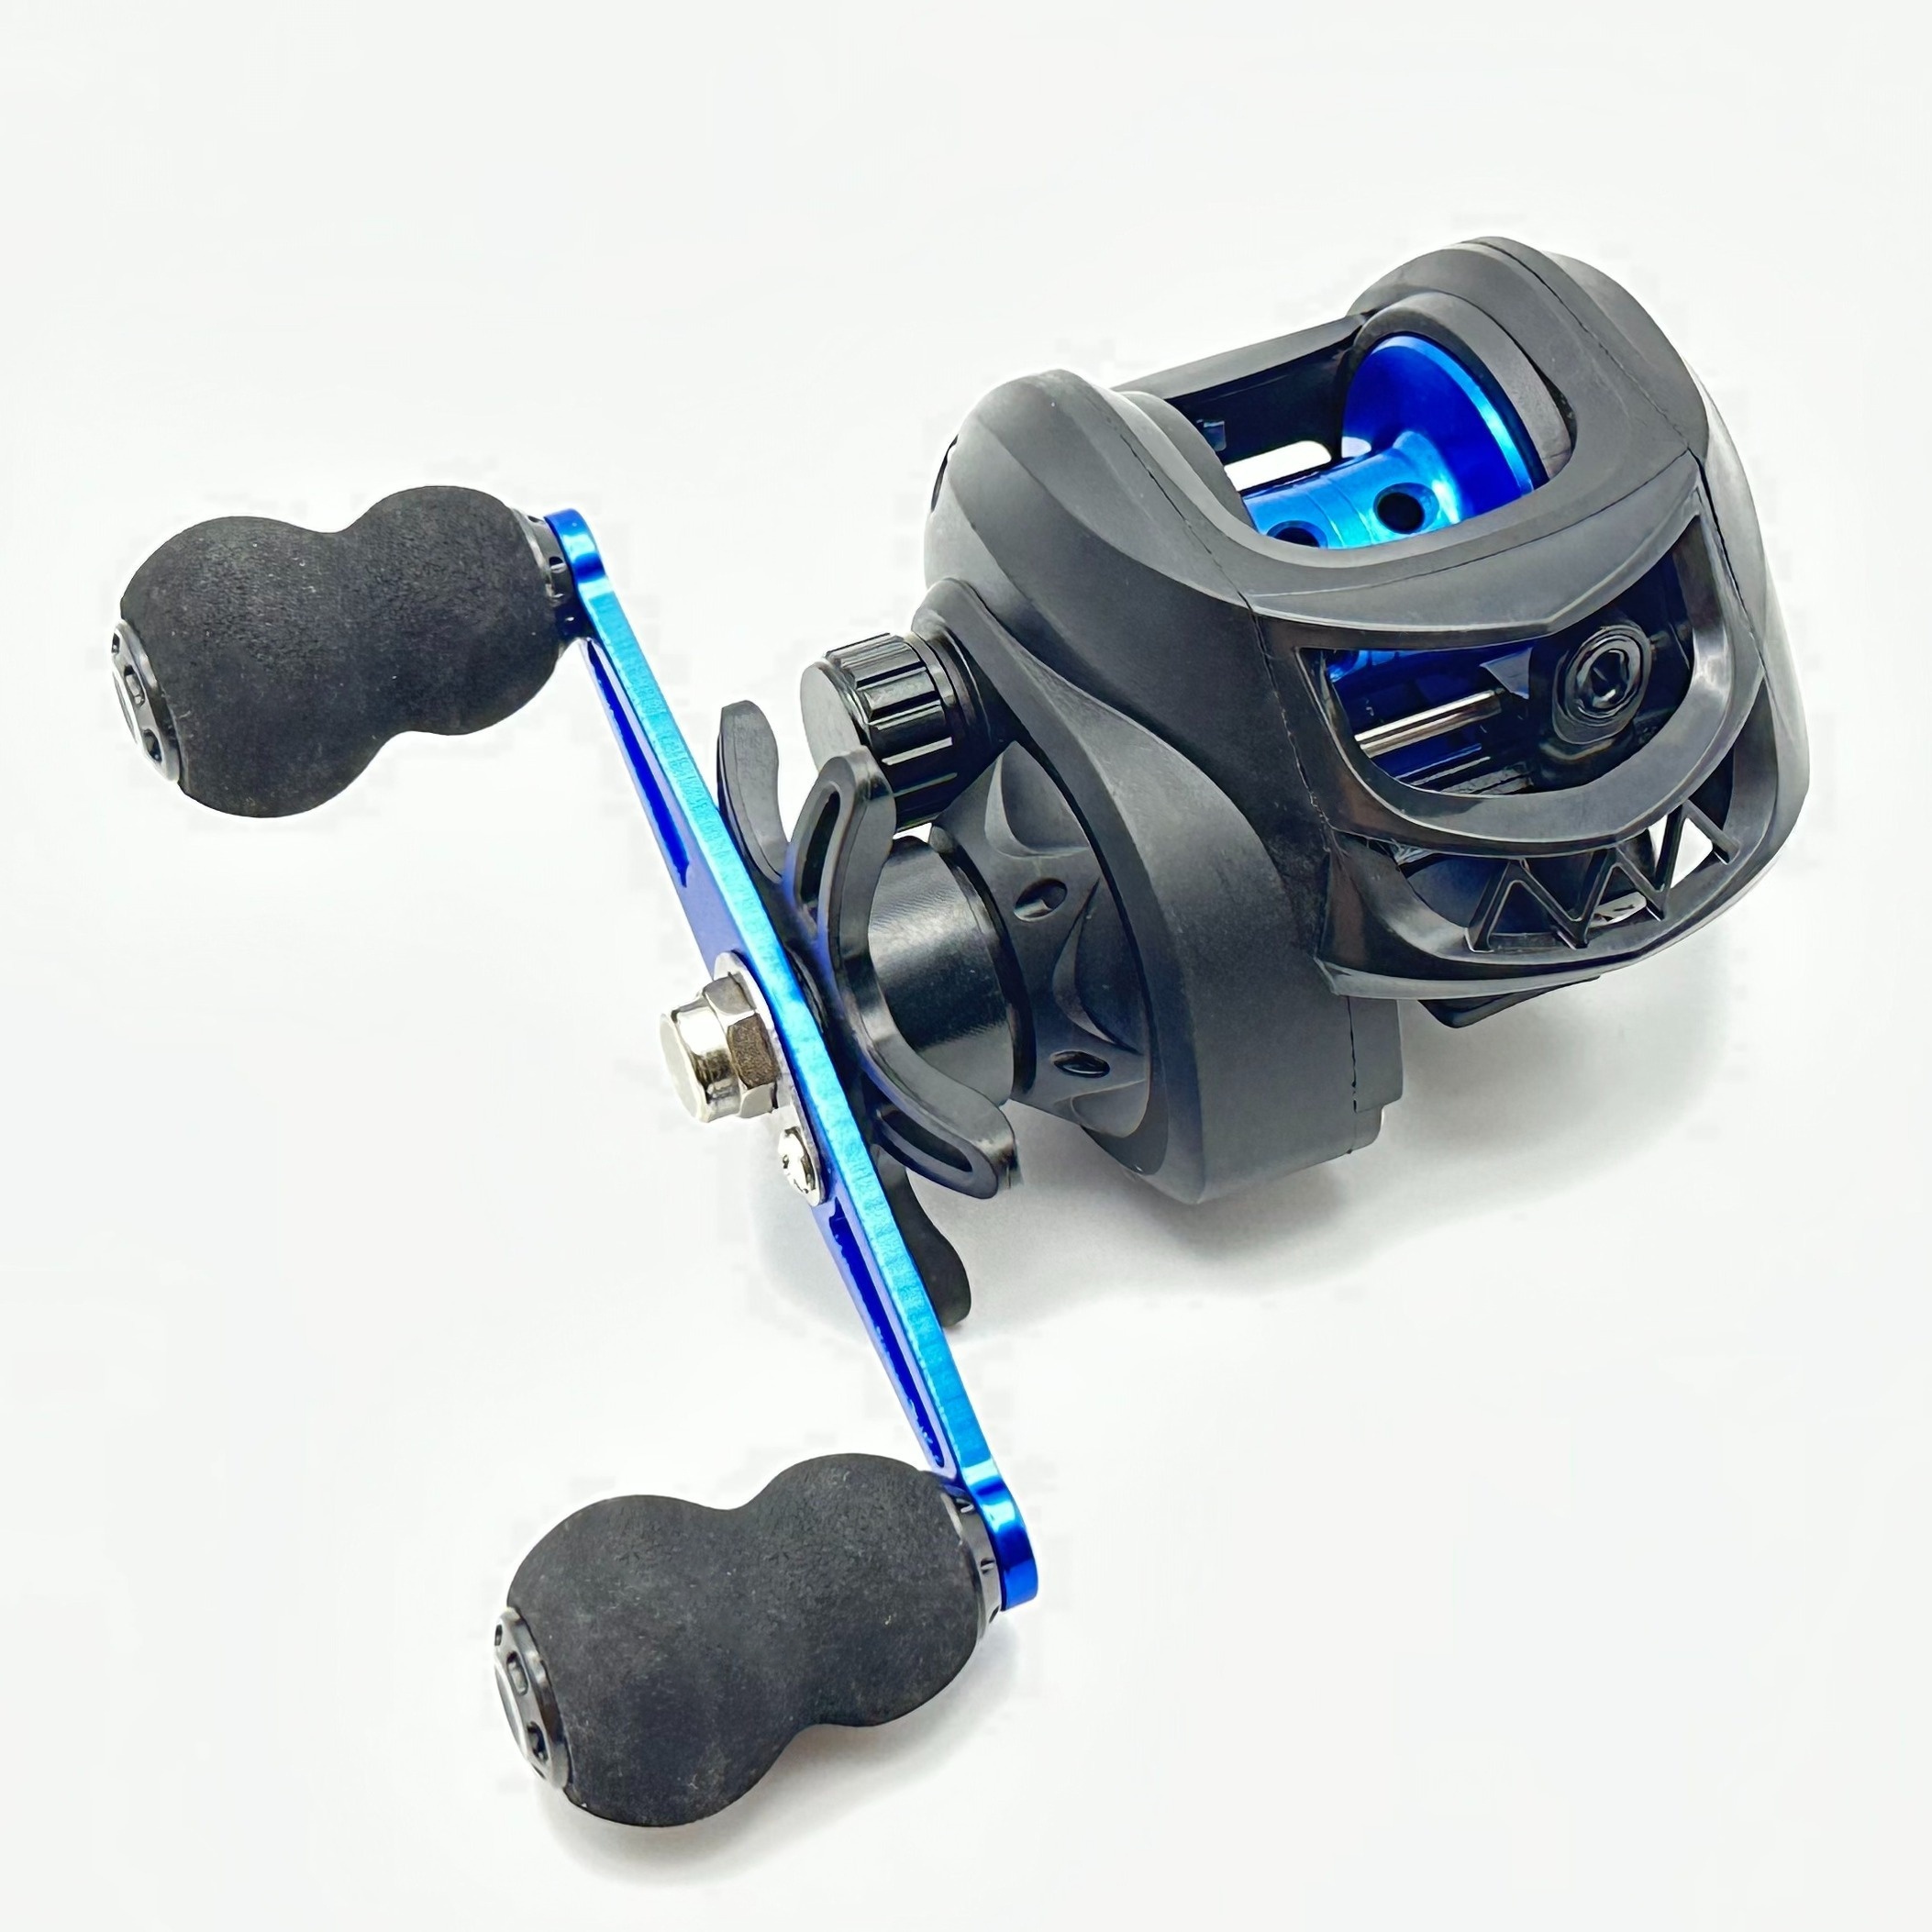 * BE Series Metal 7.2:1 Gear Ratio Baitcasting Reel, 18+1 BB Left/RIght  Hand Fishing Reel With 22.05LB Max Drag, Fishing Tackle